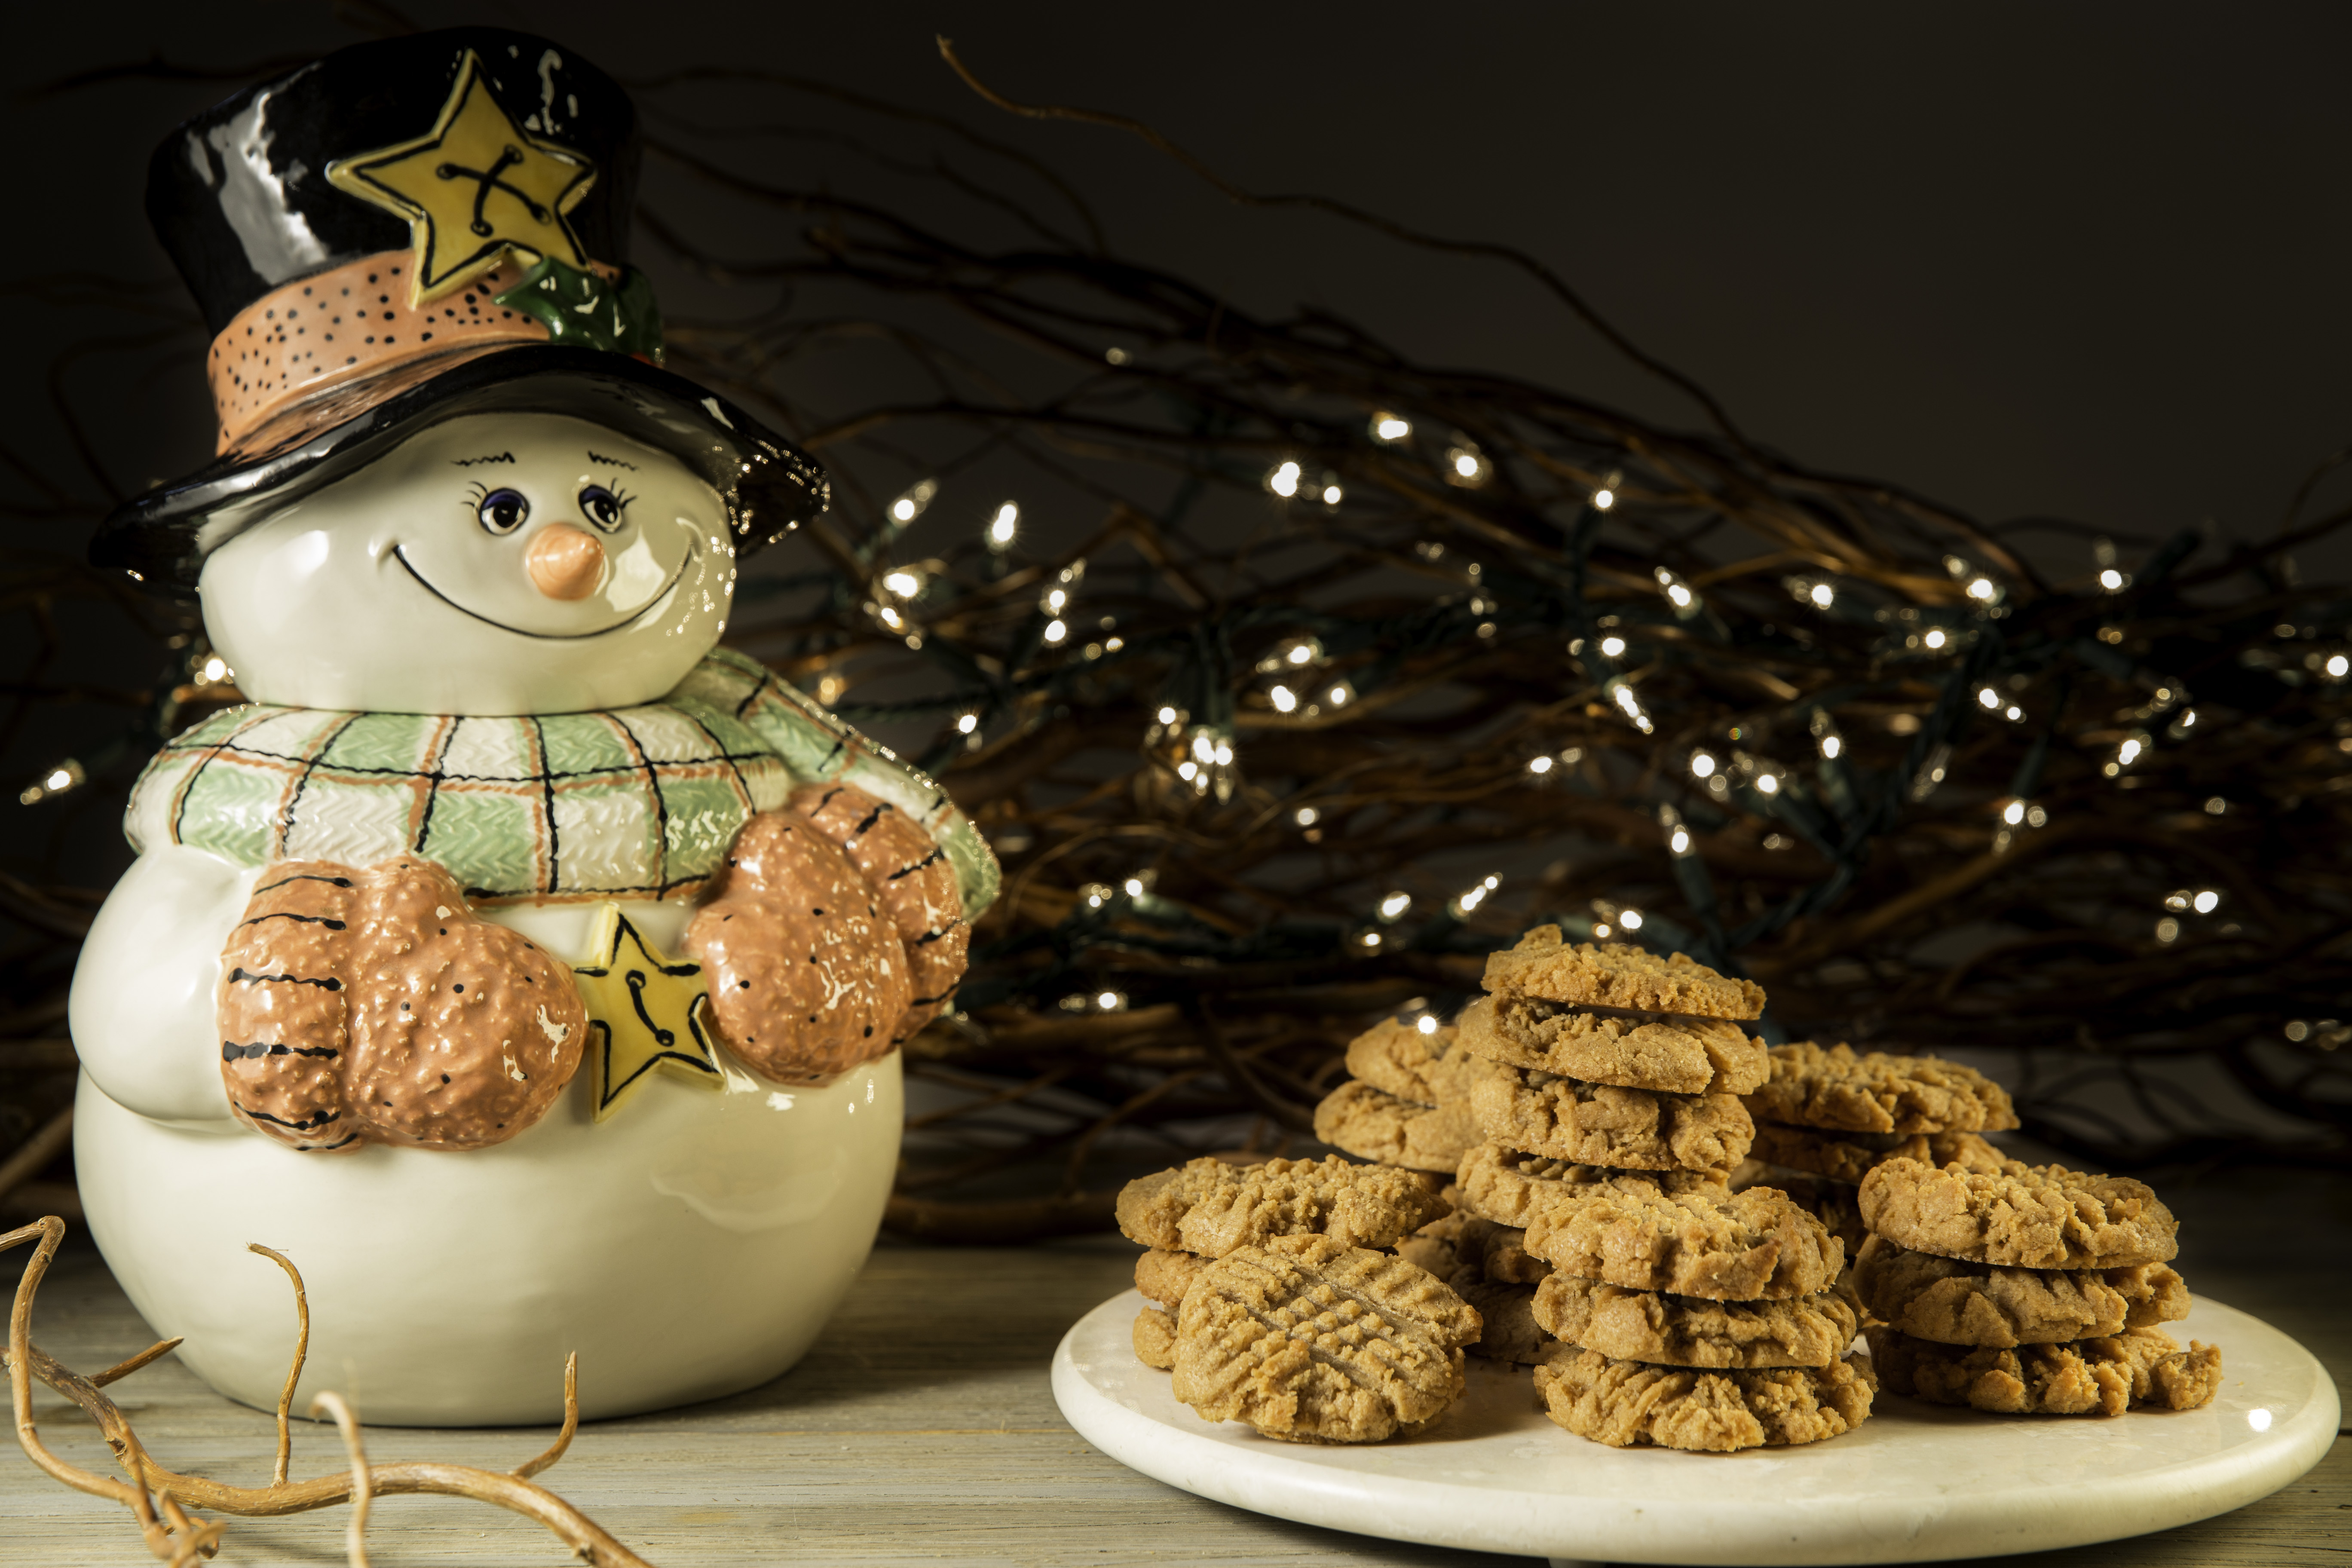 Yes, these cookies, based on a family-favorite recipe, are unbelievably delicious, unbelievably easy to prepare, and did we mention gluten-free! Fill your favorite holiday cookie jar and watch the complements pour in.